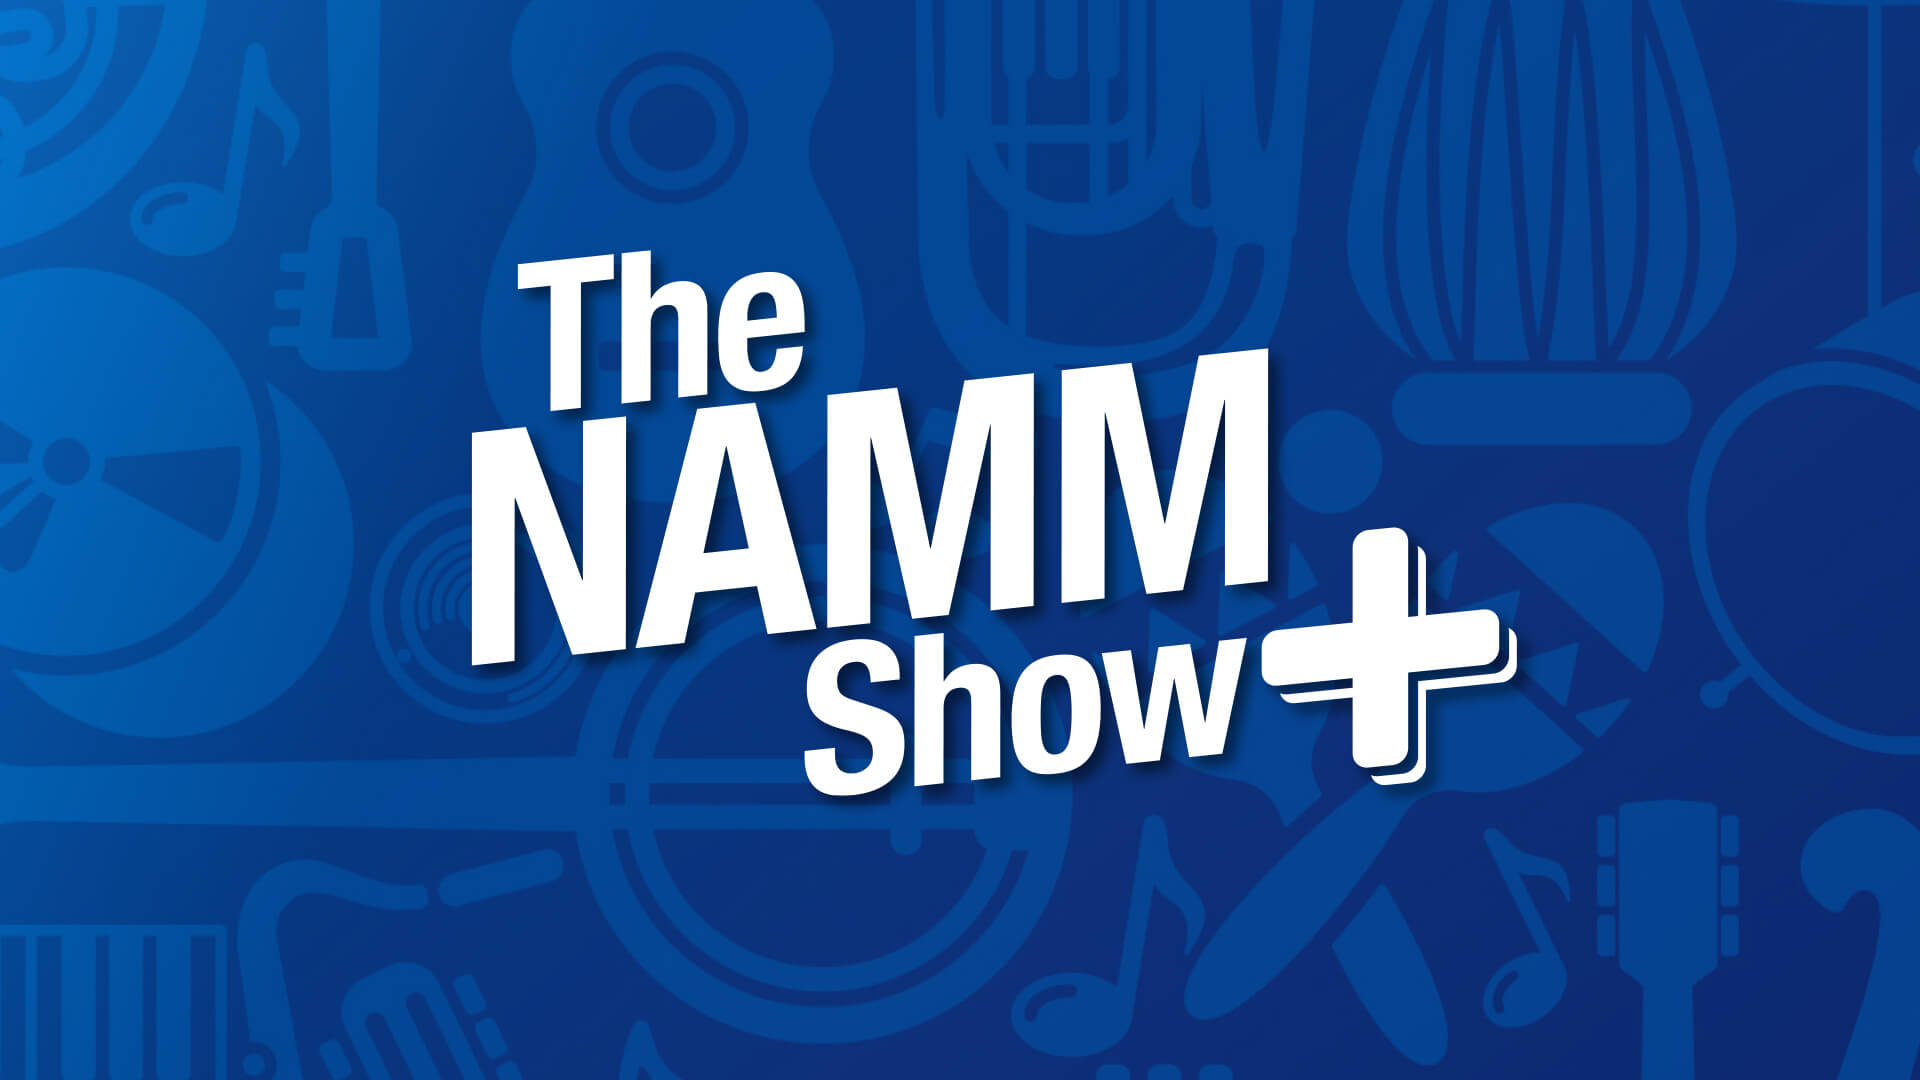 The NAMM Show +